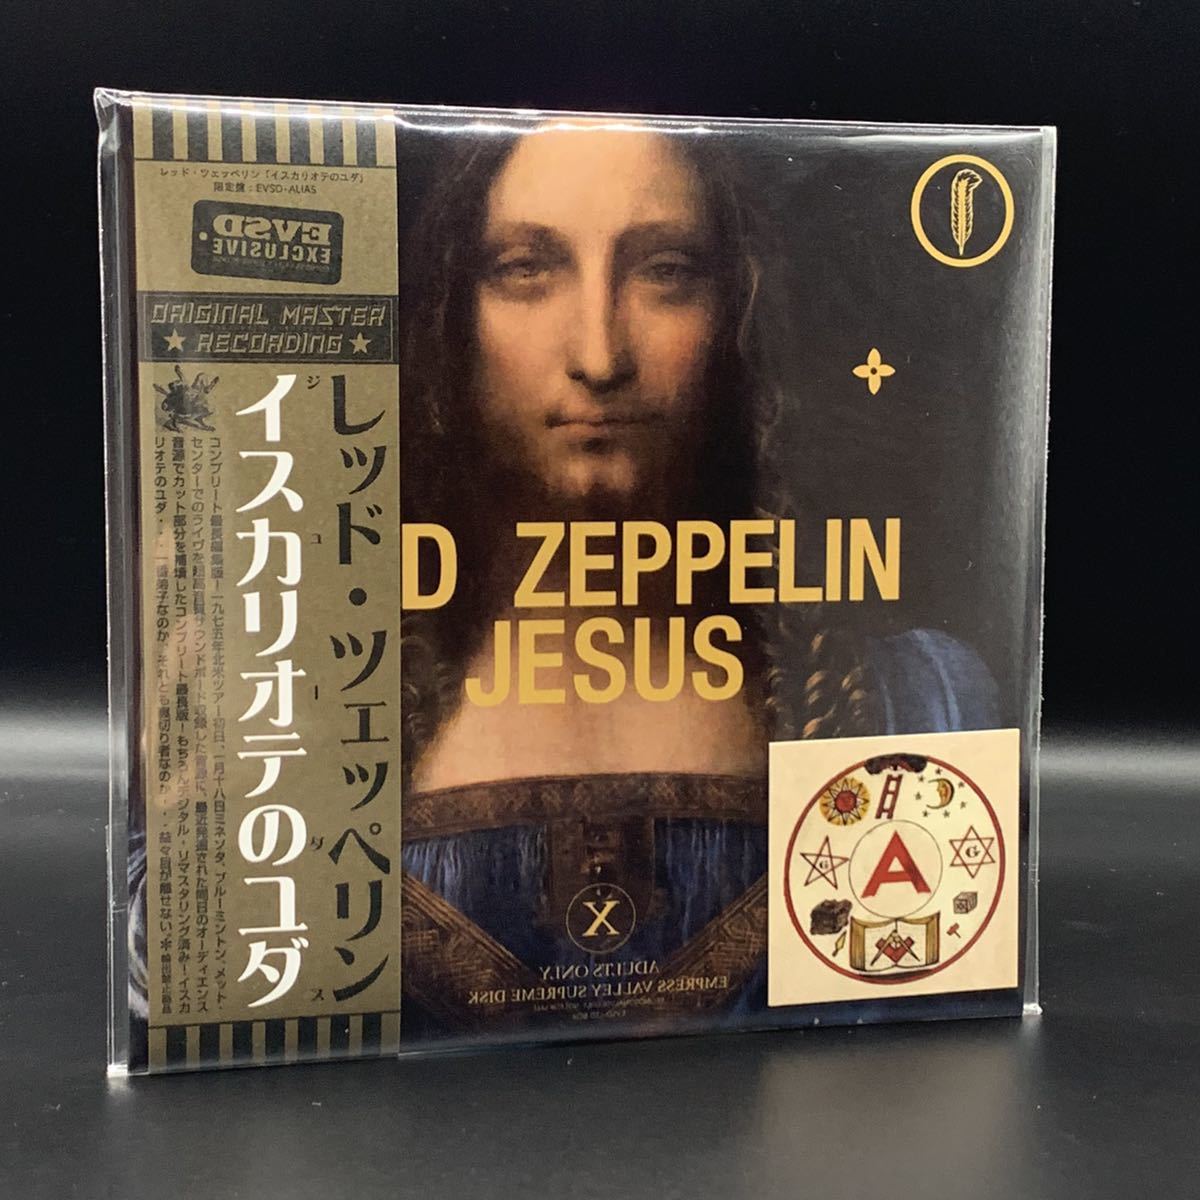 LED ZEPPELIN : JESUS 「ジュデアのジェズス」 2CD 工場プレス銀盤CD 1970 MONTREUX 限定盤！の画像1